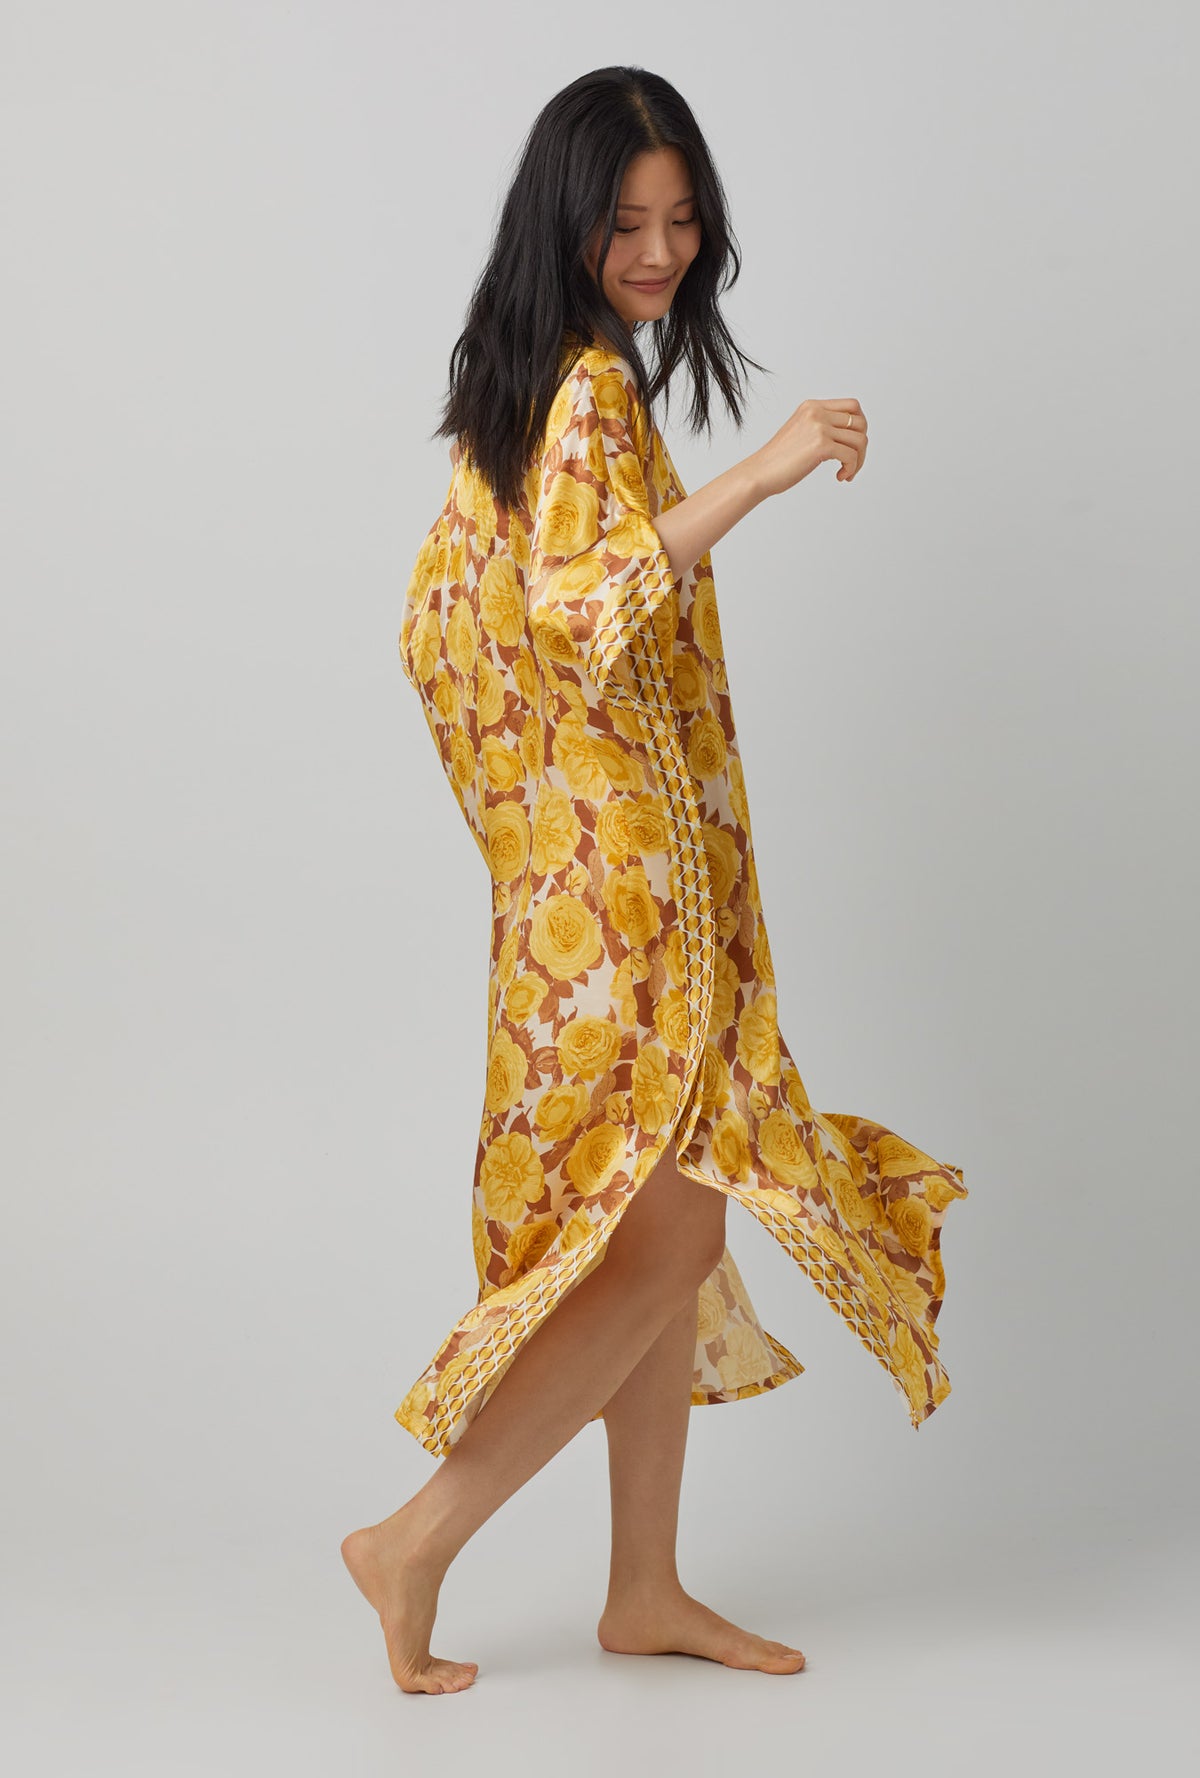 A lady wearing yellow Classic Washable Silk Caftan with Golden Roses print.